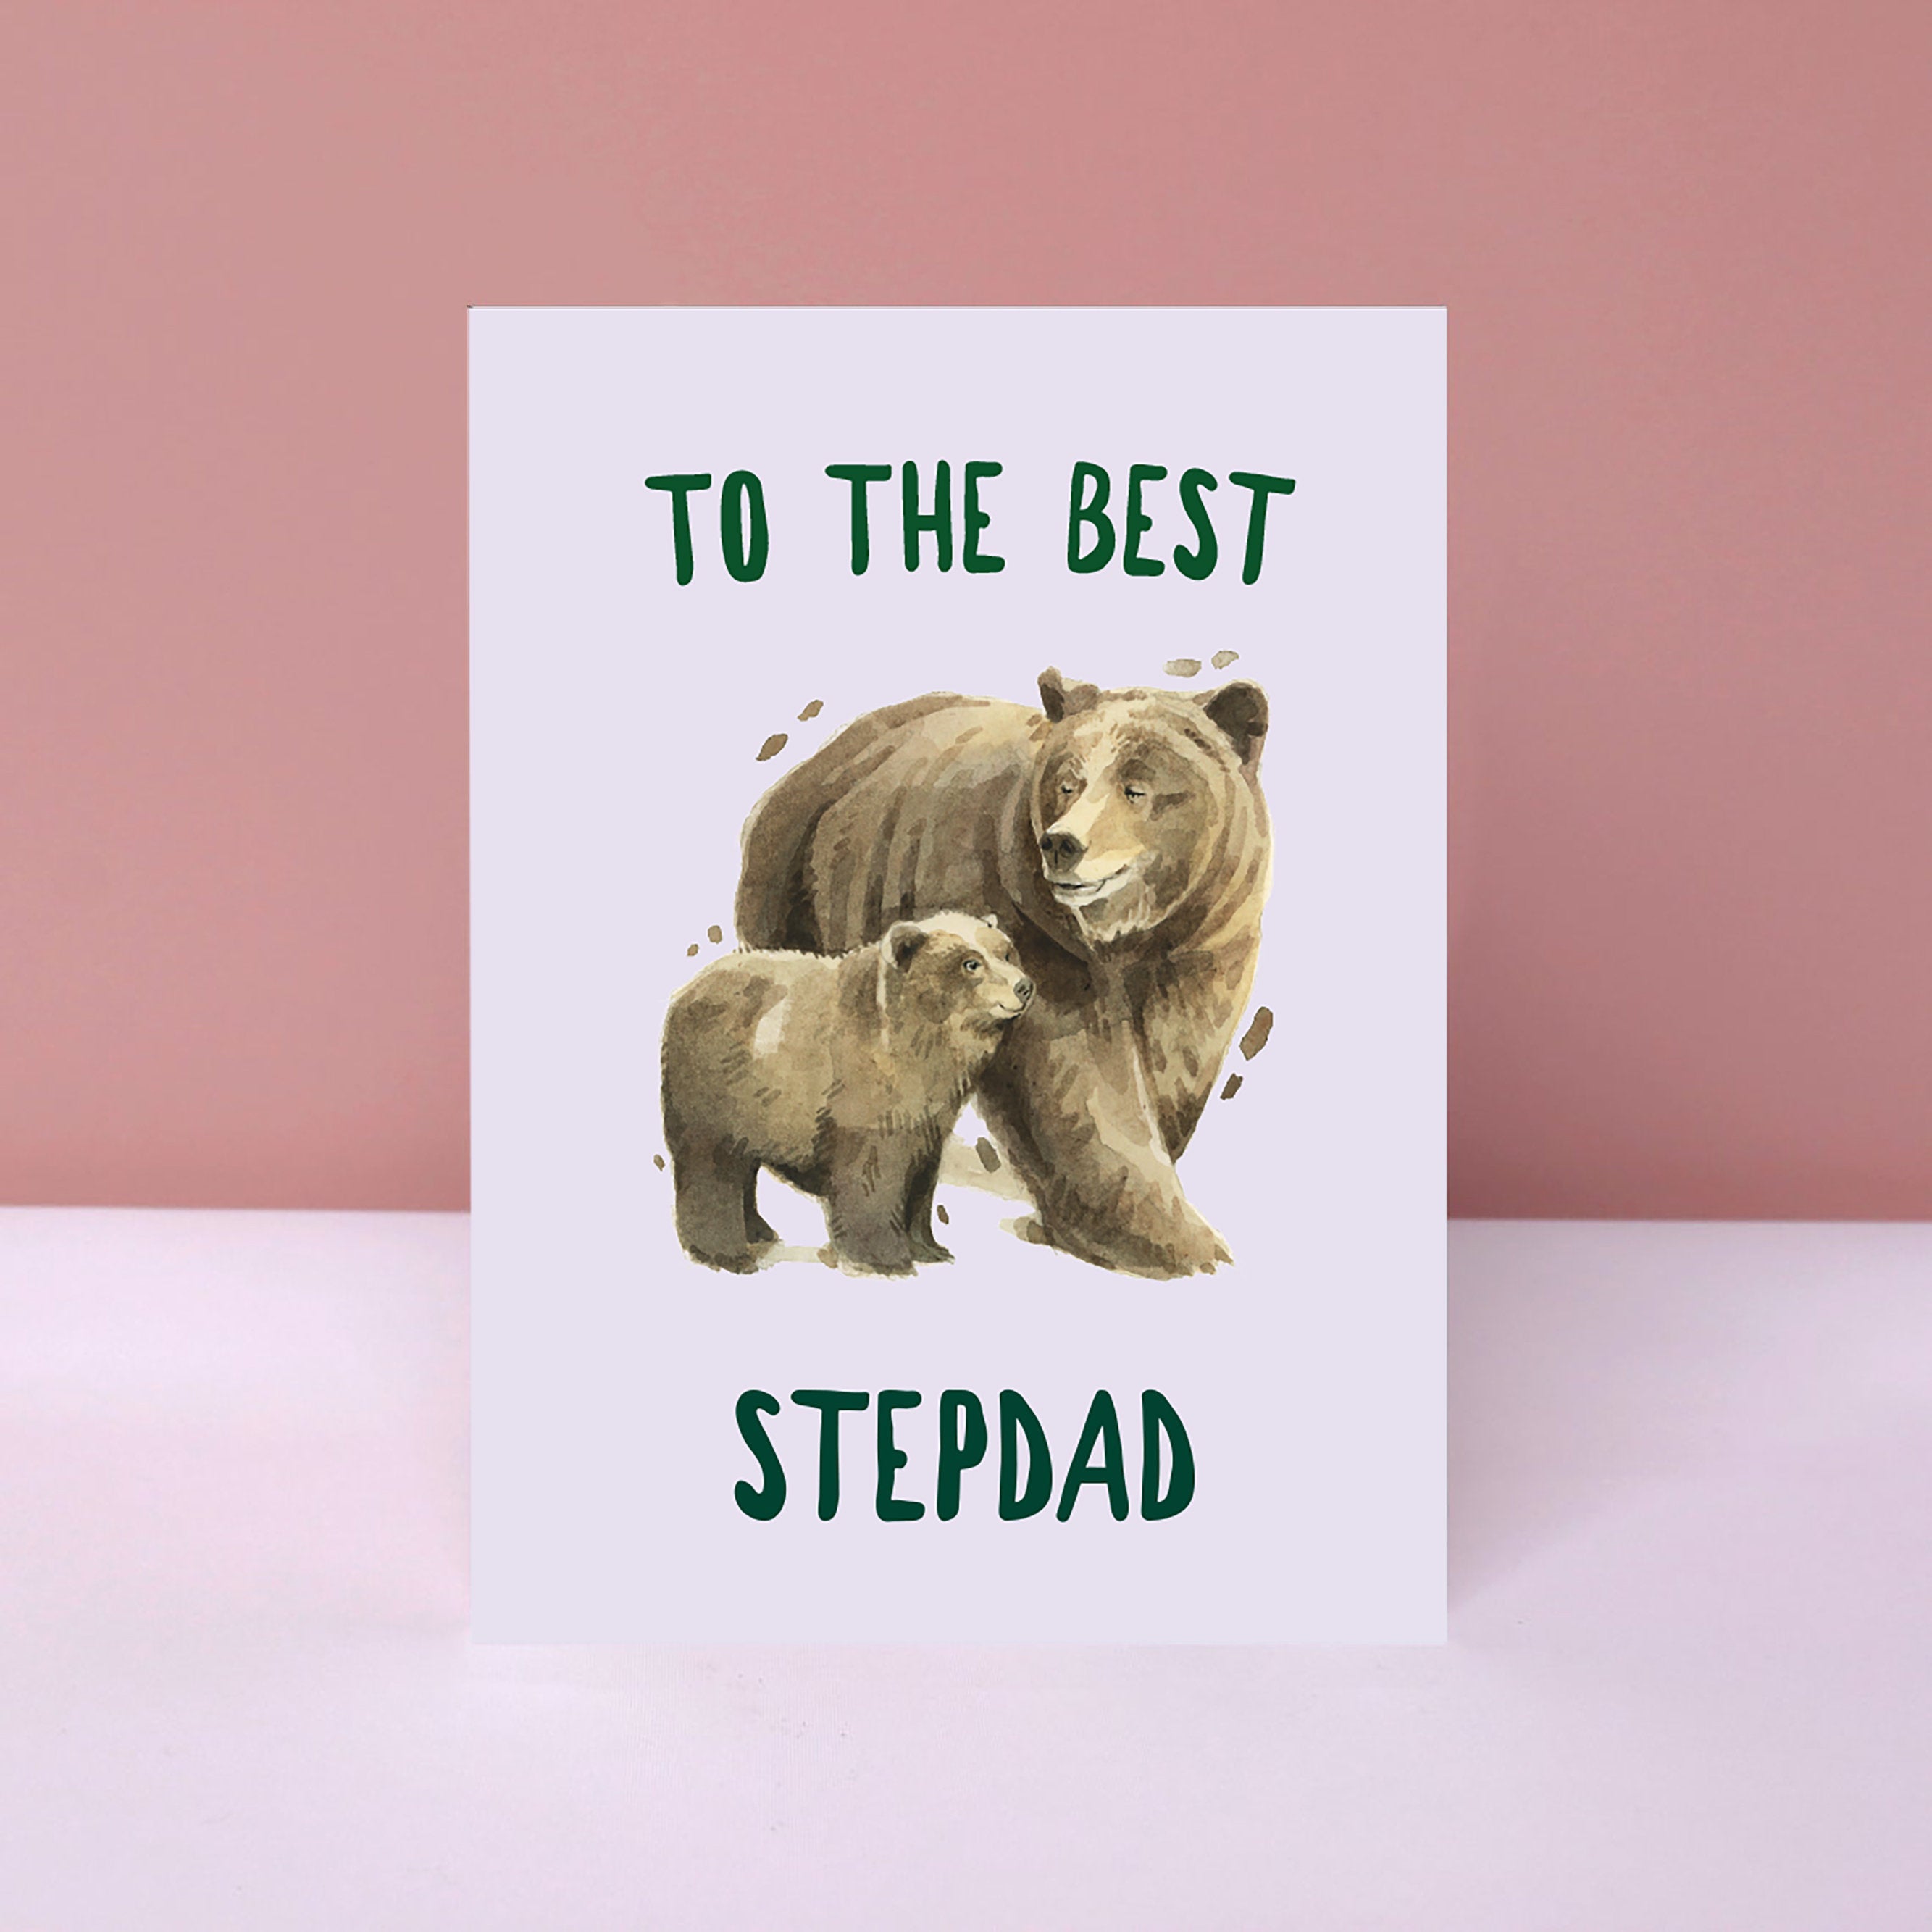 To the Best Stepdad, Bear Card for Father's Day, Stepdad's Birthday